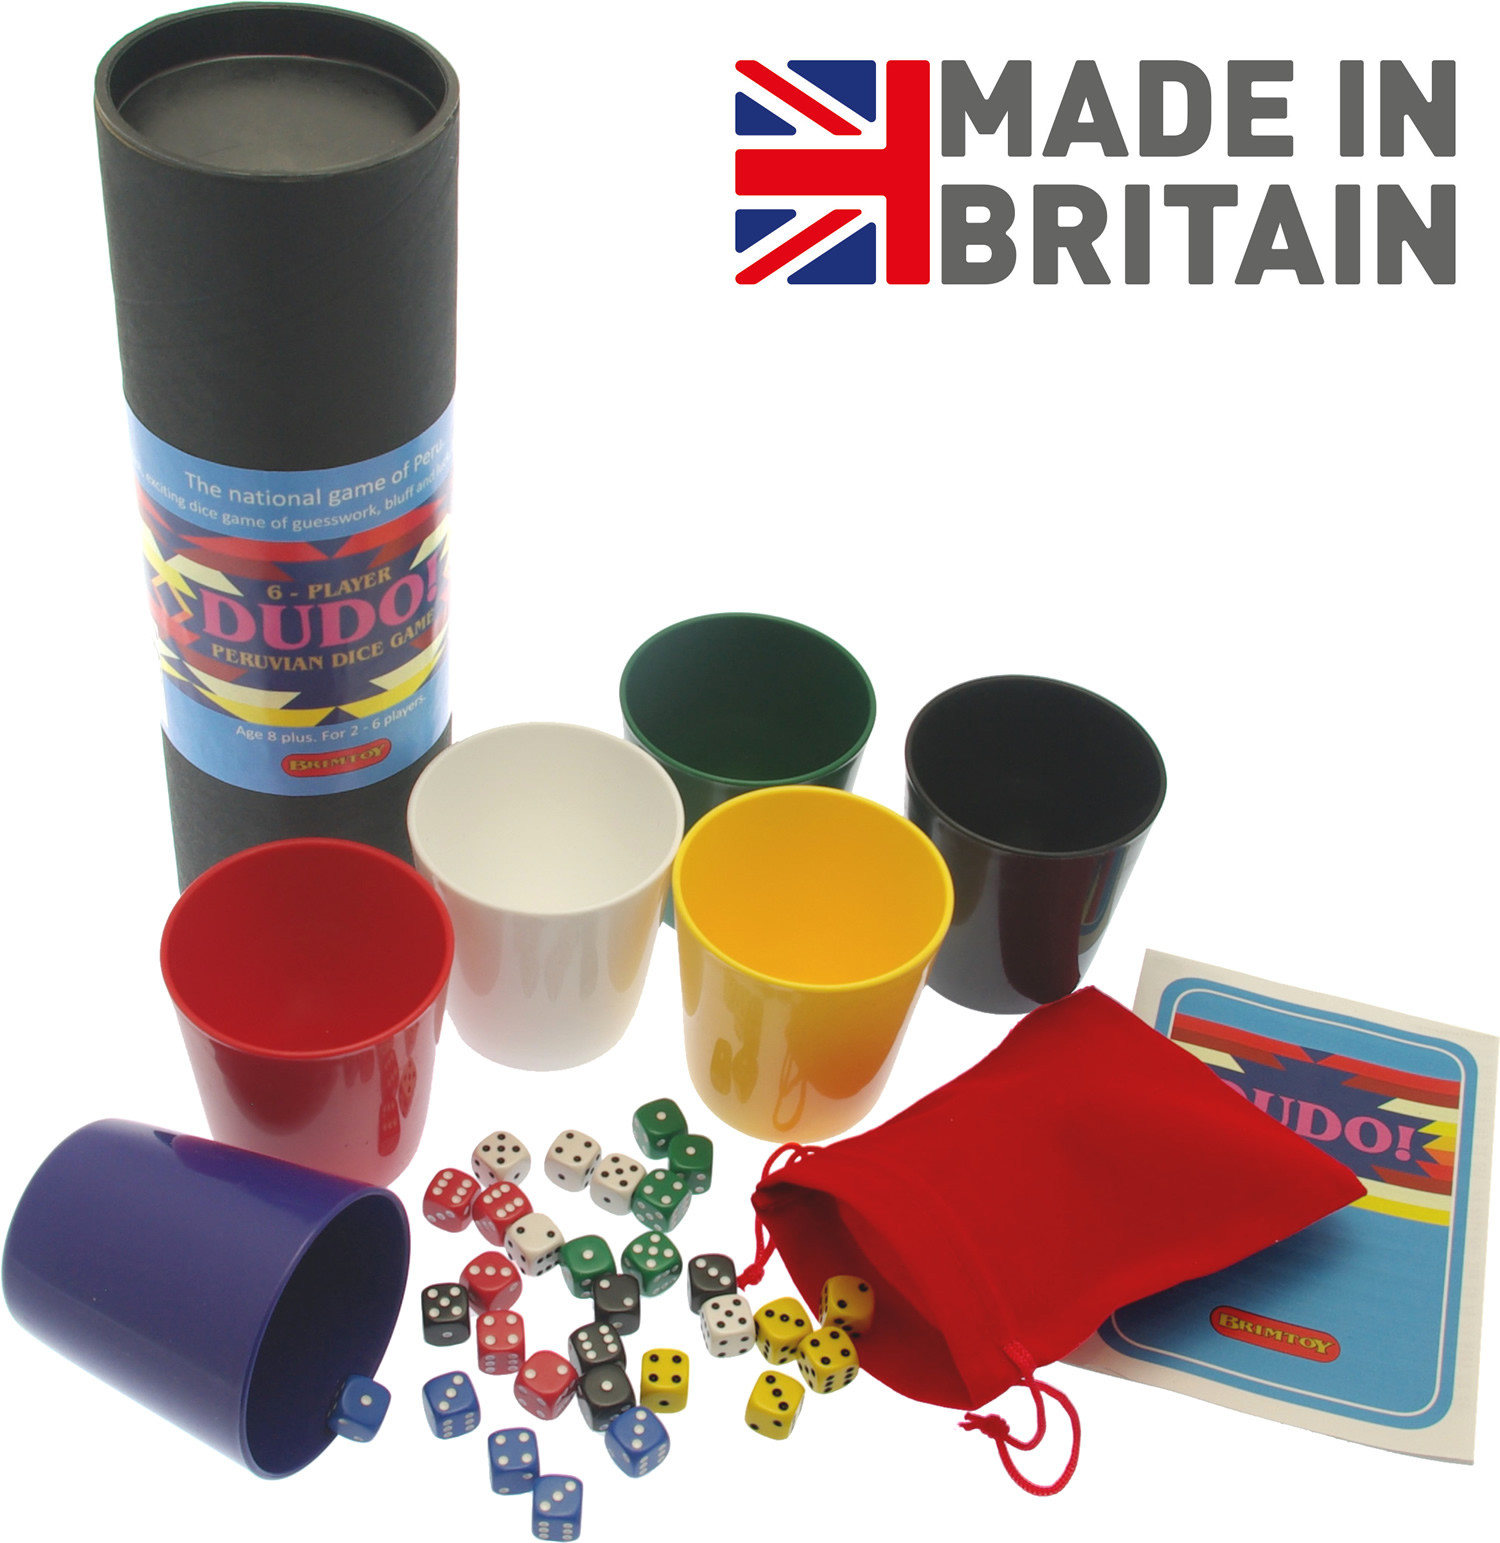 Perudo the Original South American Liars Dice Game Outset Media